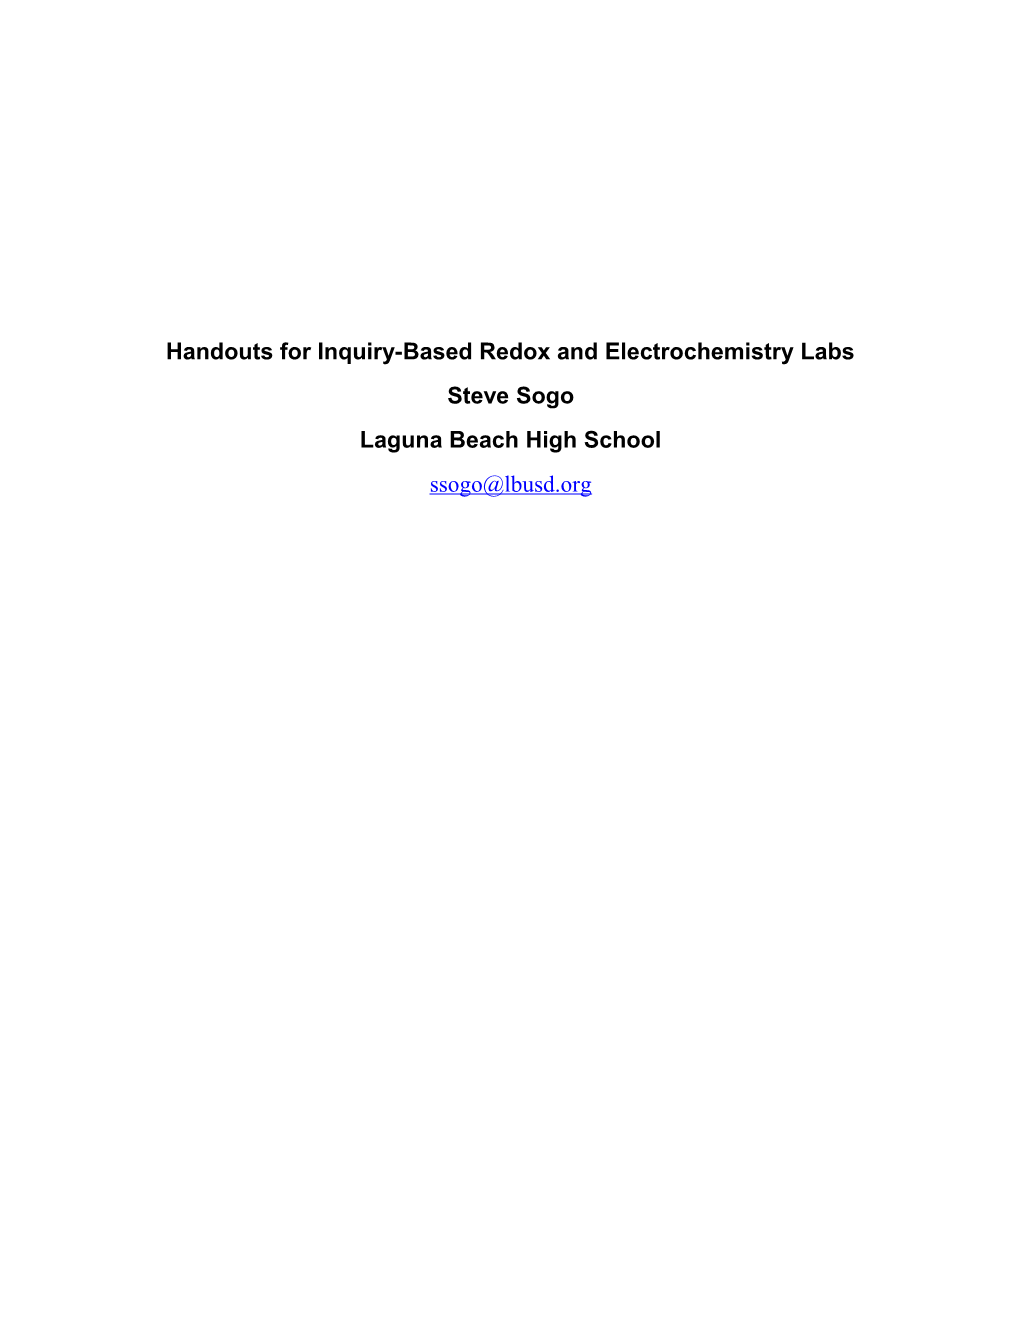 Handouts for Inquiry-Based Redox and Electrochemistry Labs